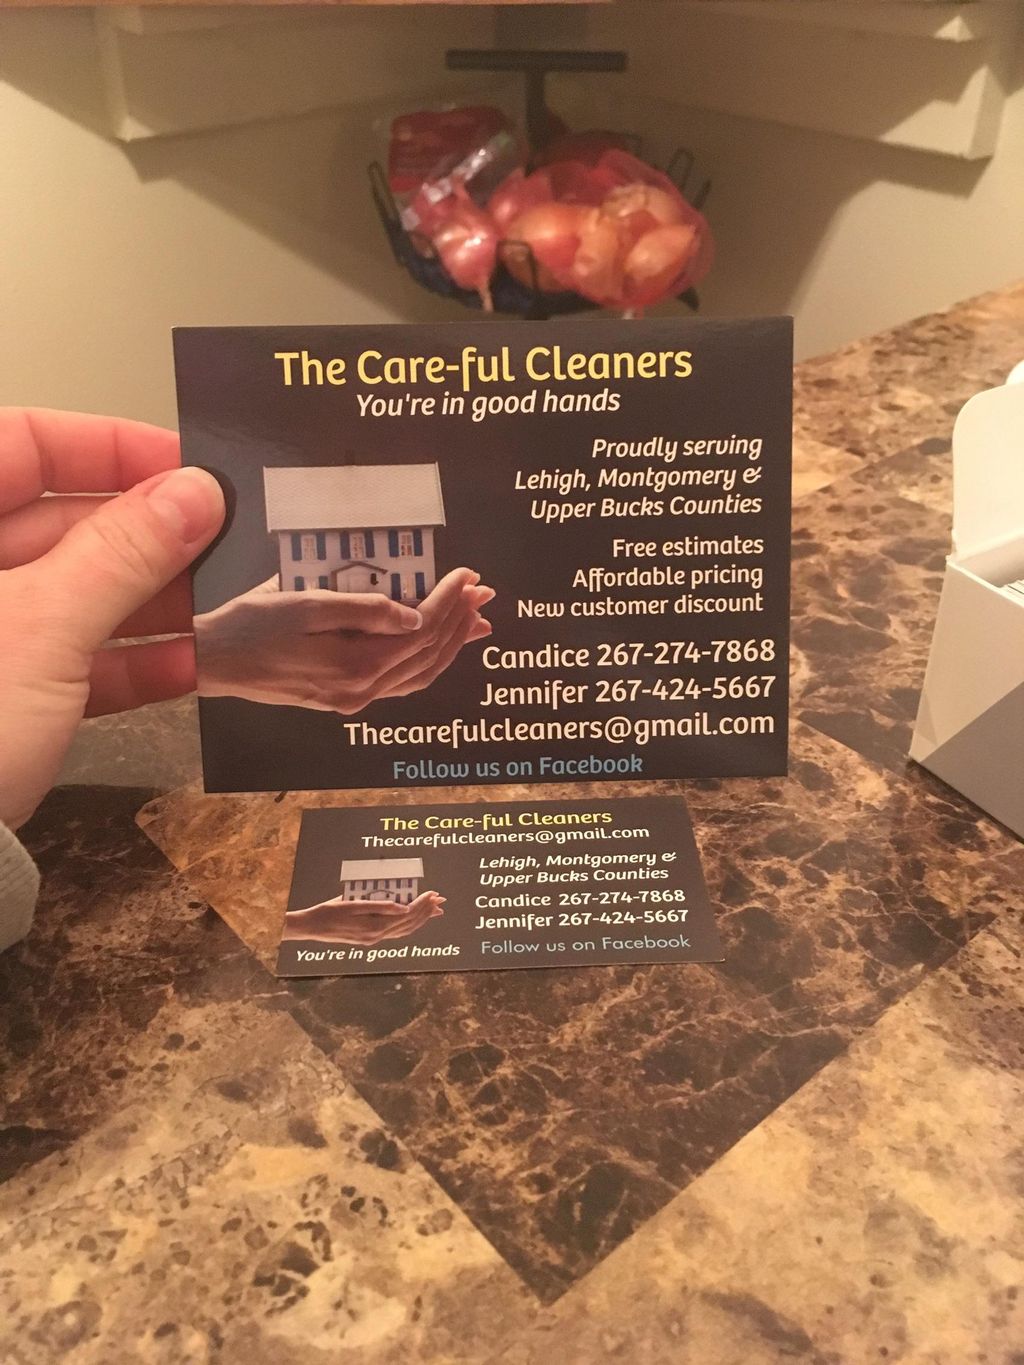 The Care-ful Cleaners